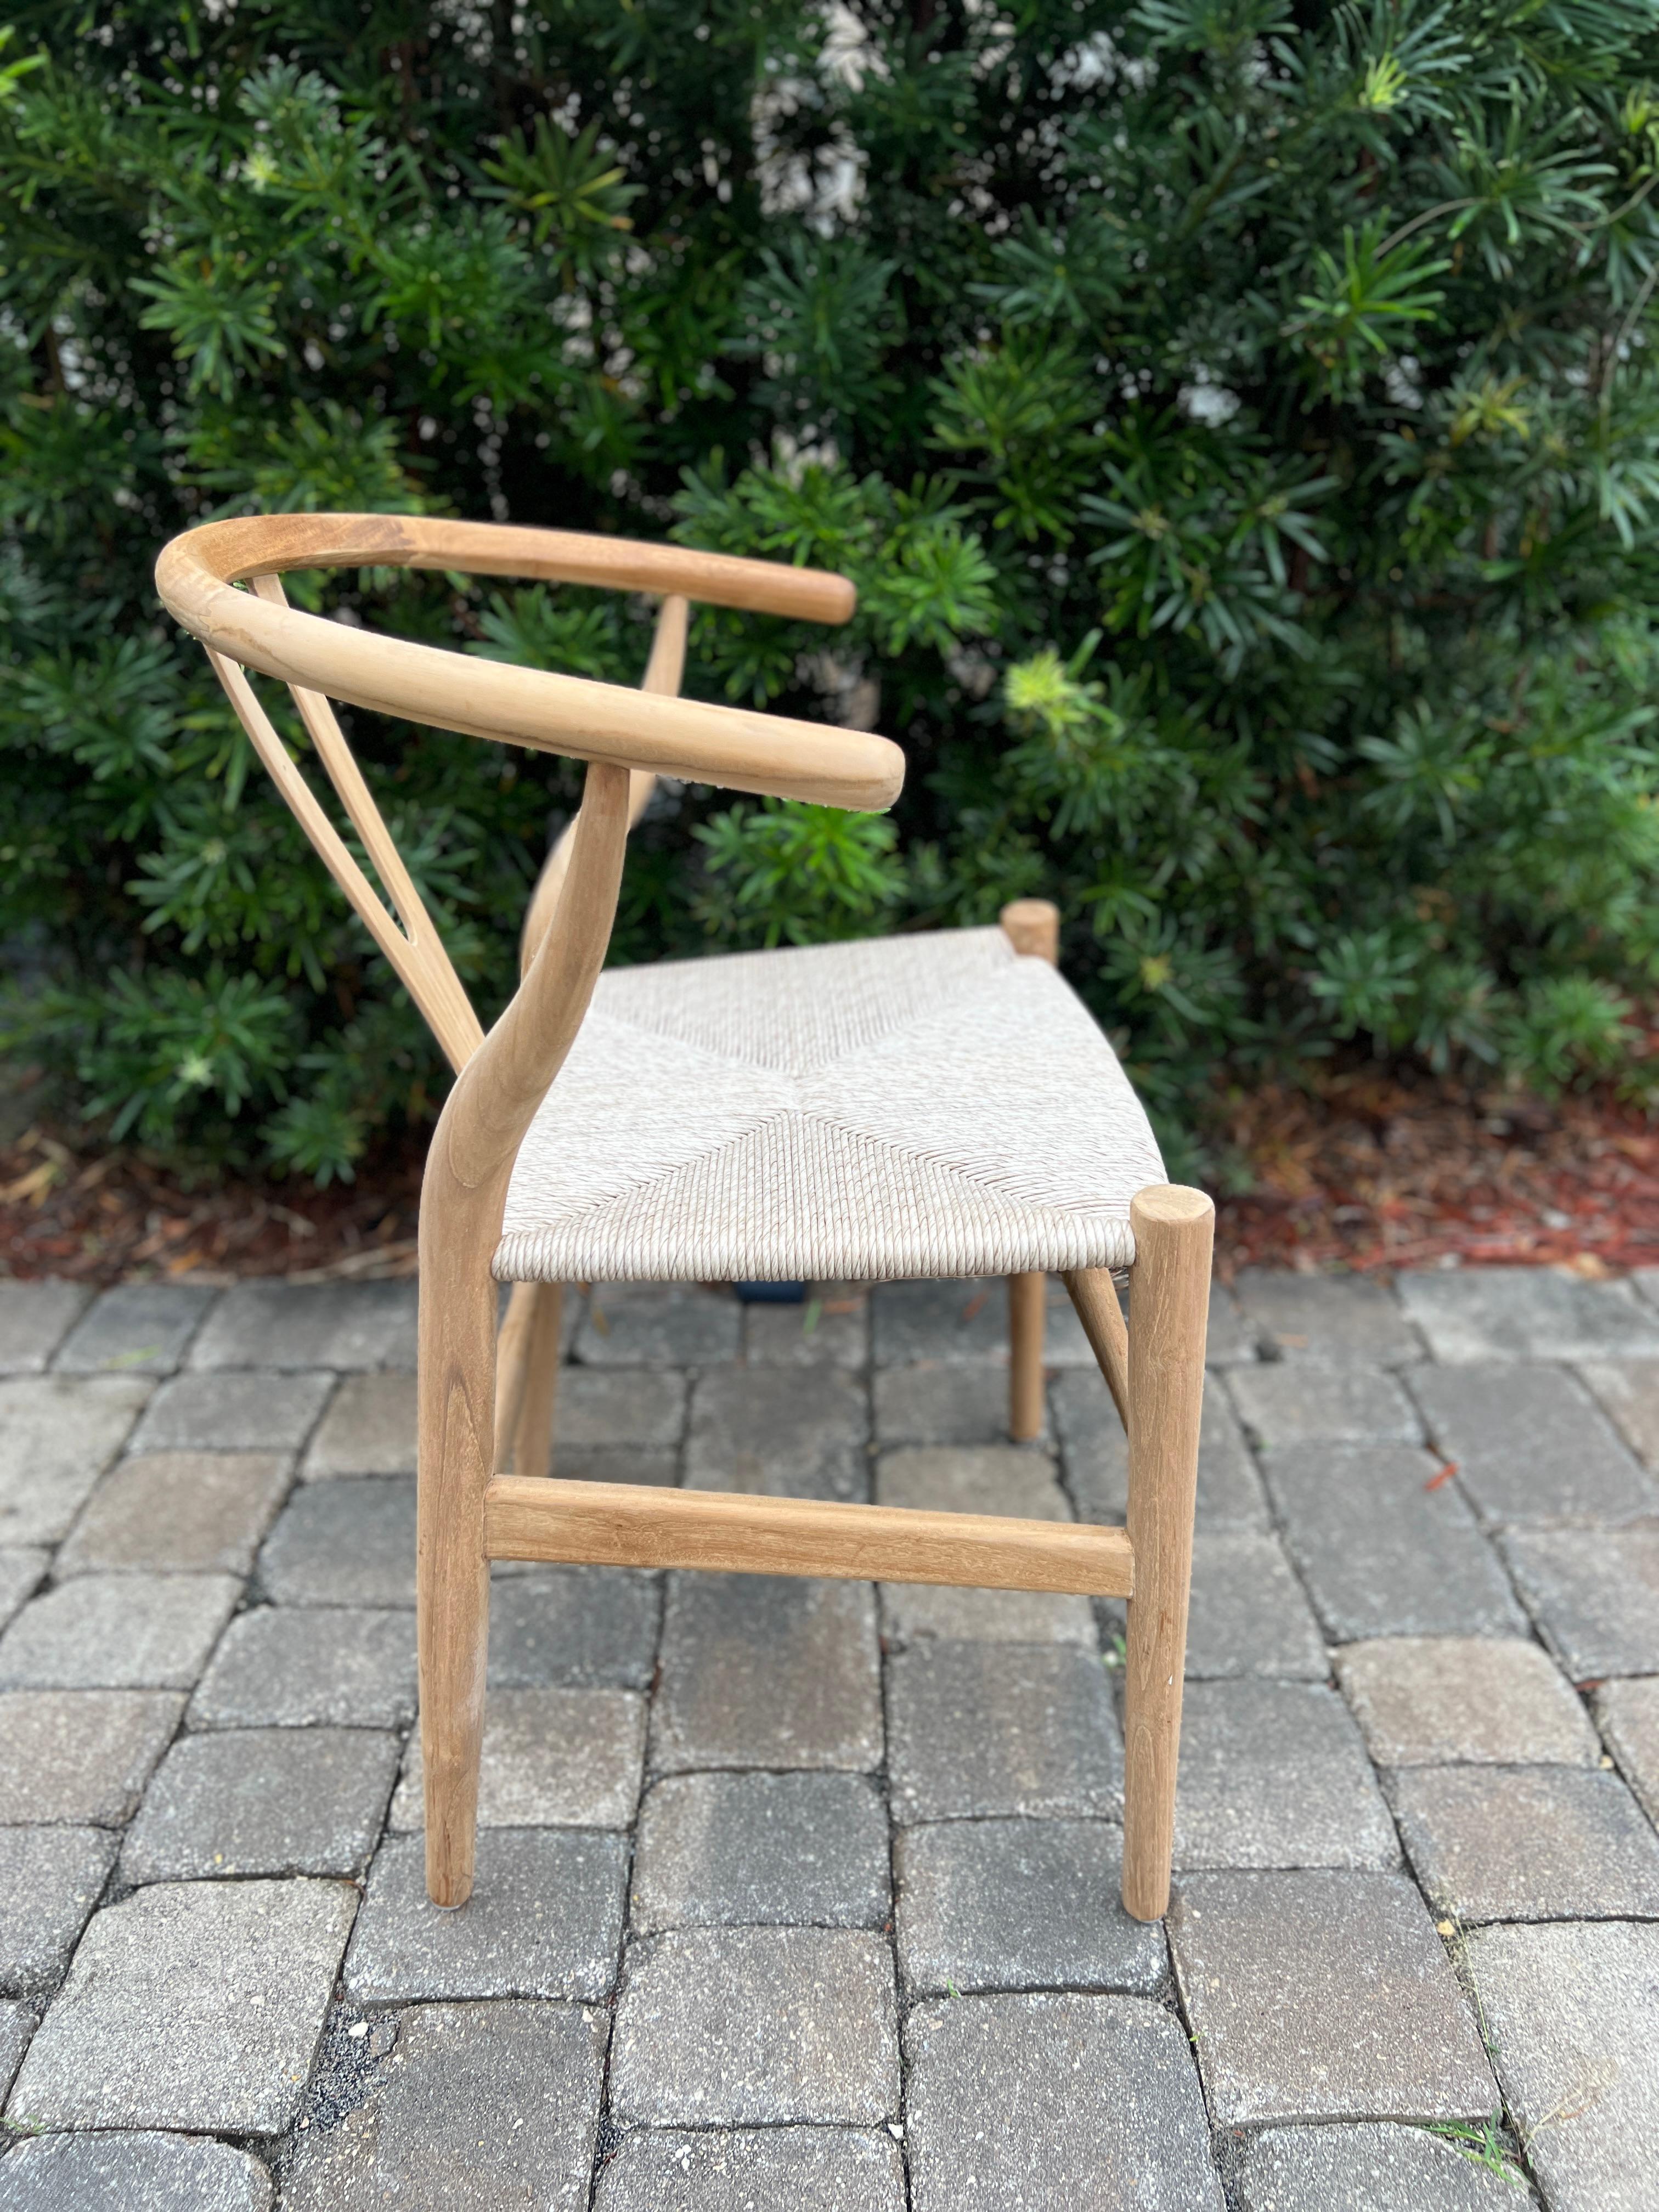 Contemporary Mid-Century Modern Chair in Natural Teak Wood with Handwoven Seat, Denmark